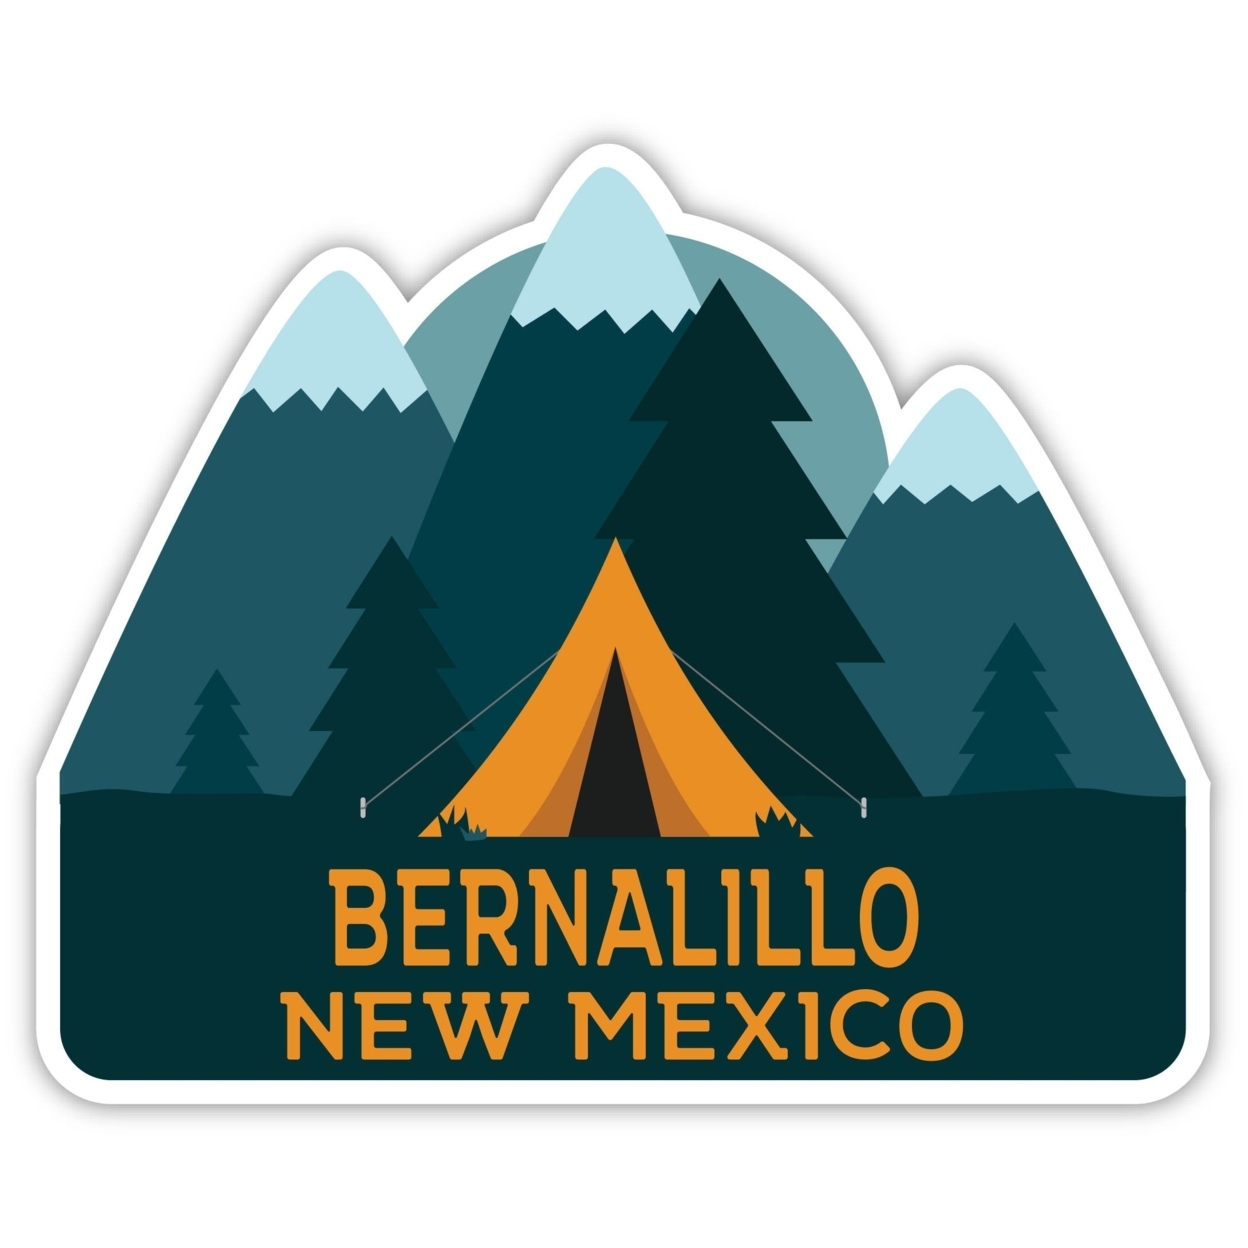 Bernalillo New Mexico Souvenir Decorative Stickers (Choose Theme And Size) - 4-Pack, 2-Inch, Bear